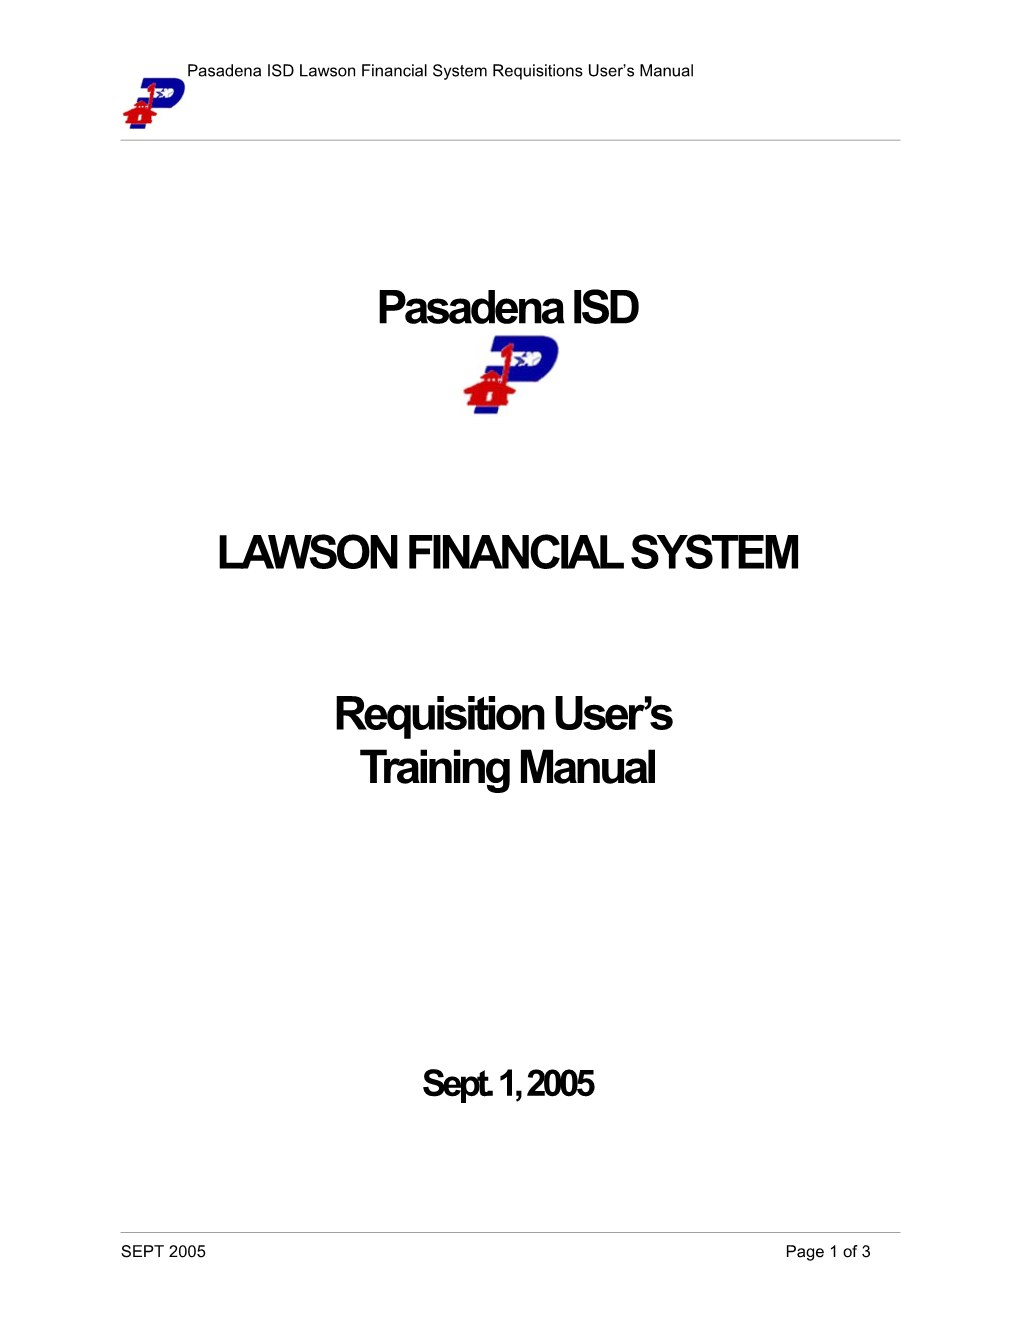 Requisition Training Manual